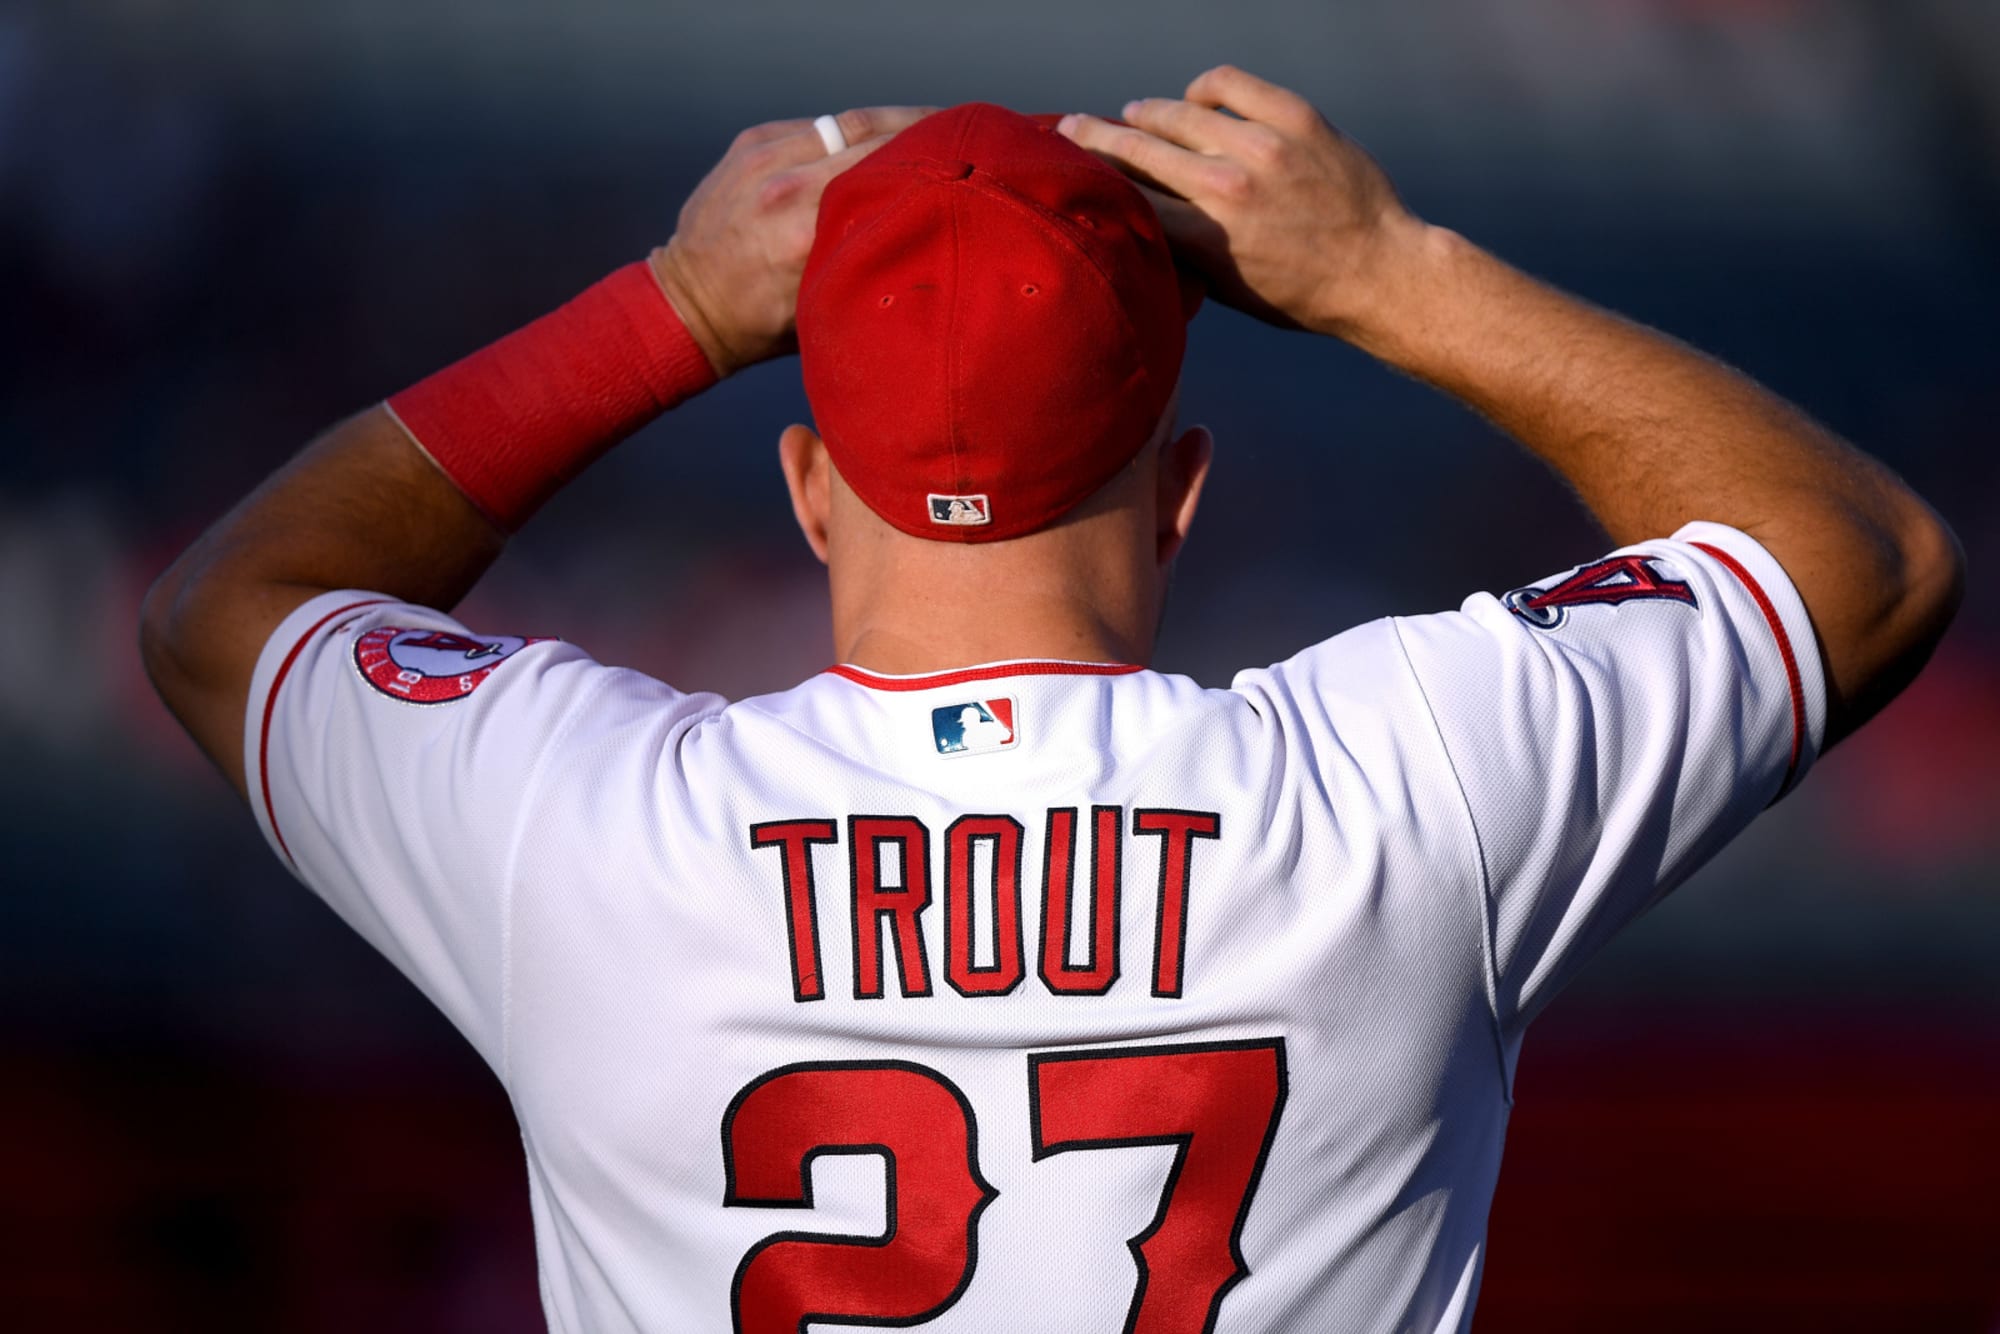 Mike Trout: the 2009 Draft